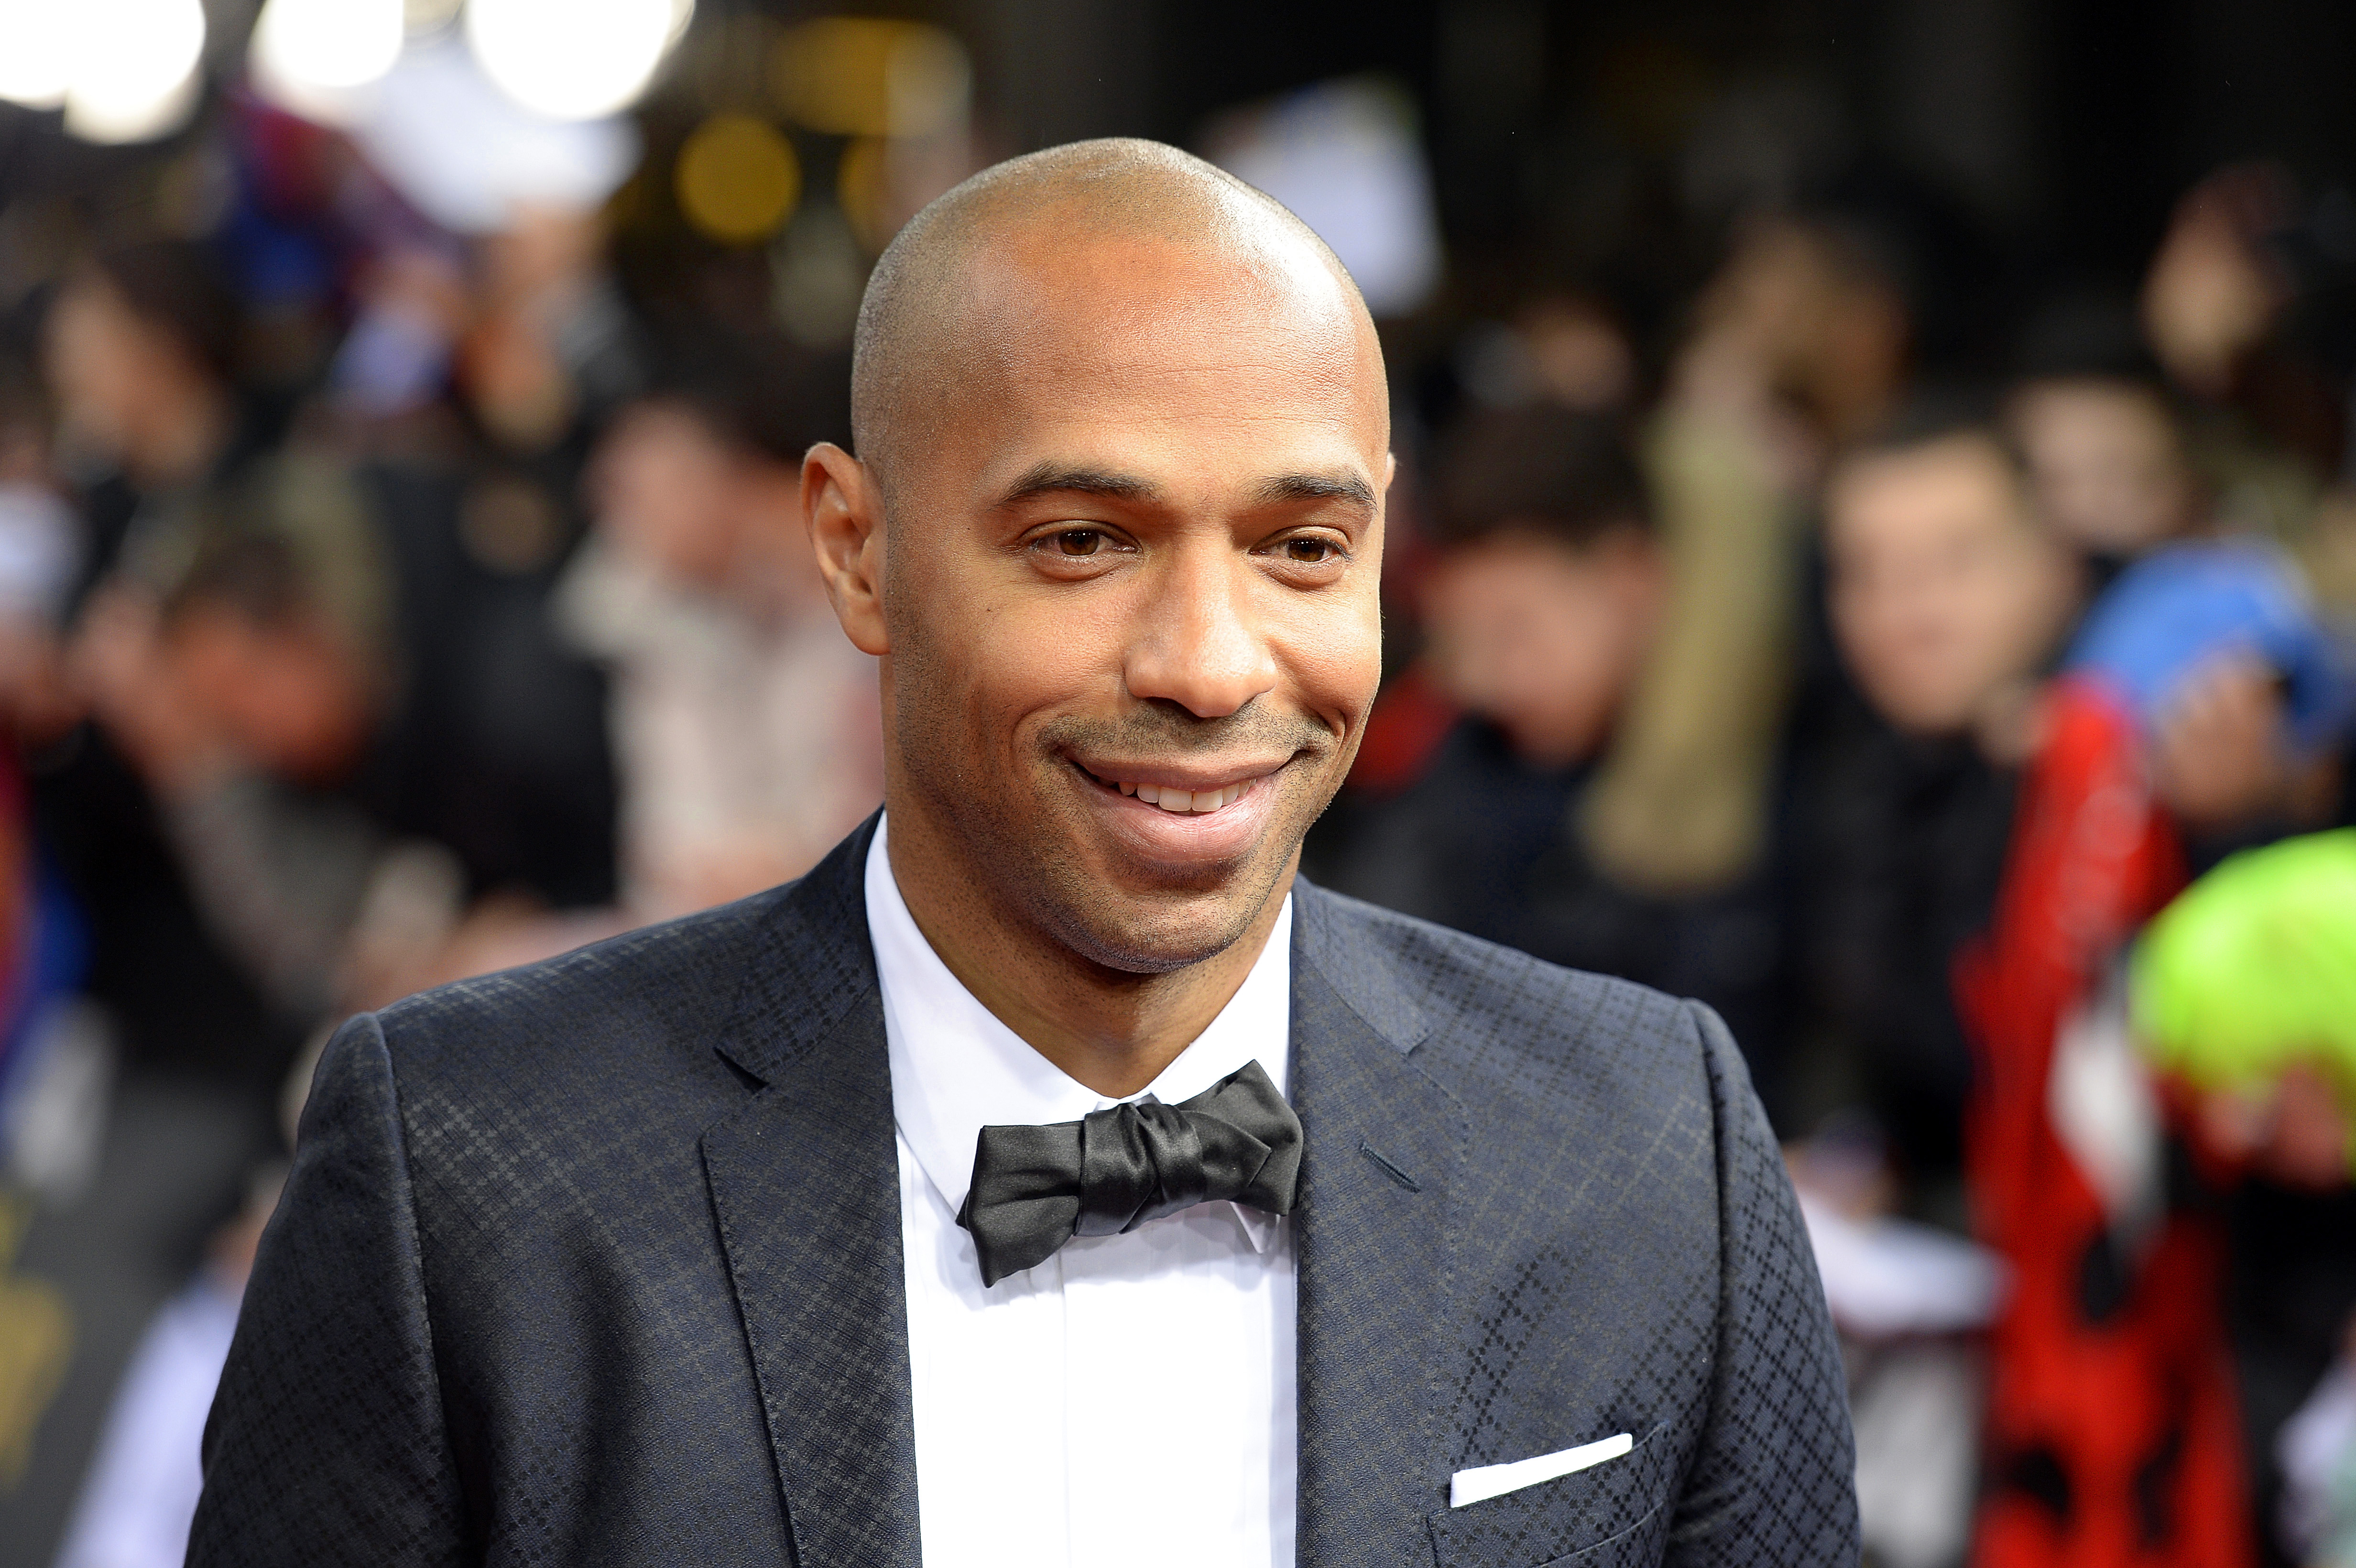 epa04557439 Former French soccer player Thierry Henry arrives on the red carpet prior to the FIFA Ballon d'Or 2014 gala held at the Kongresshaus in Zurich, Switzerland, 12 January 2015.  EPA/WALTER BIERI